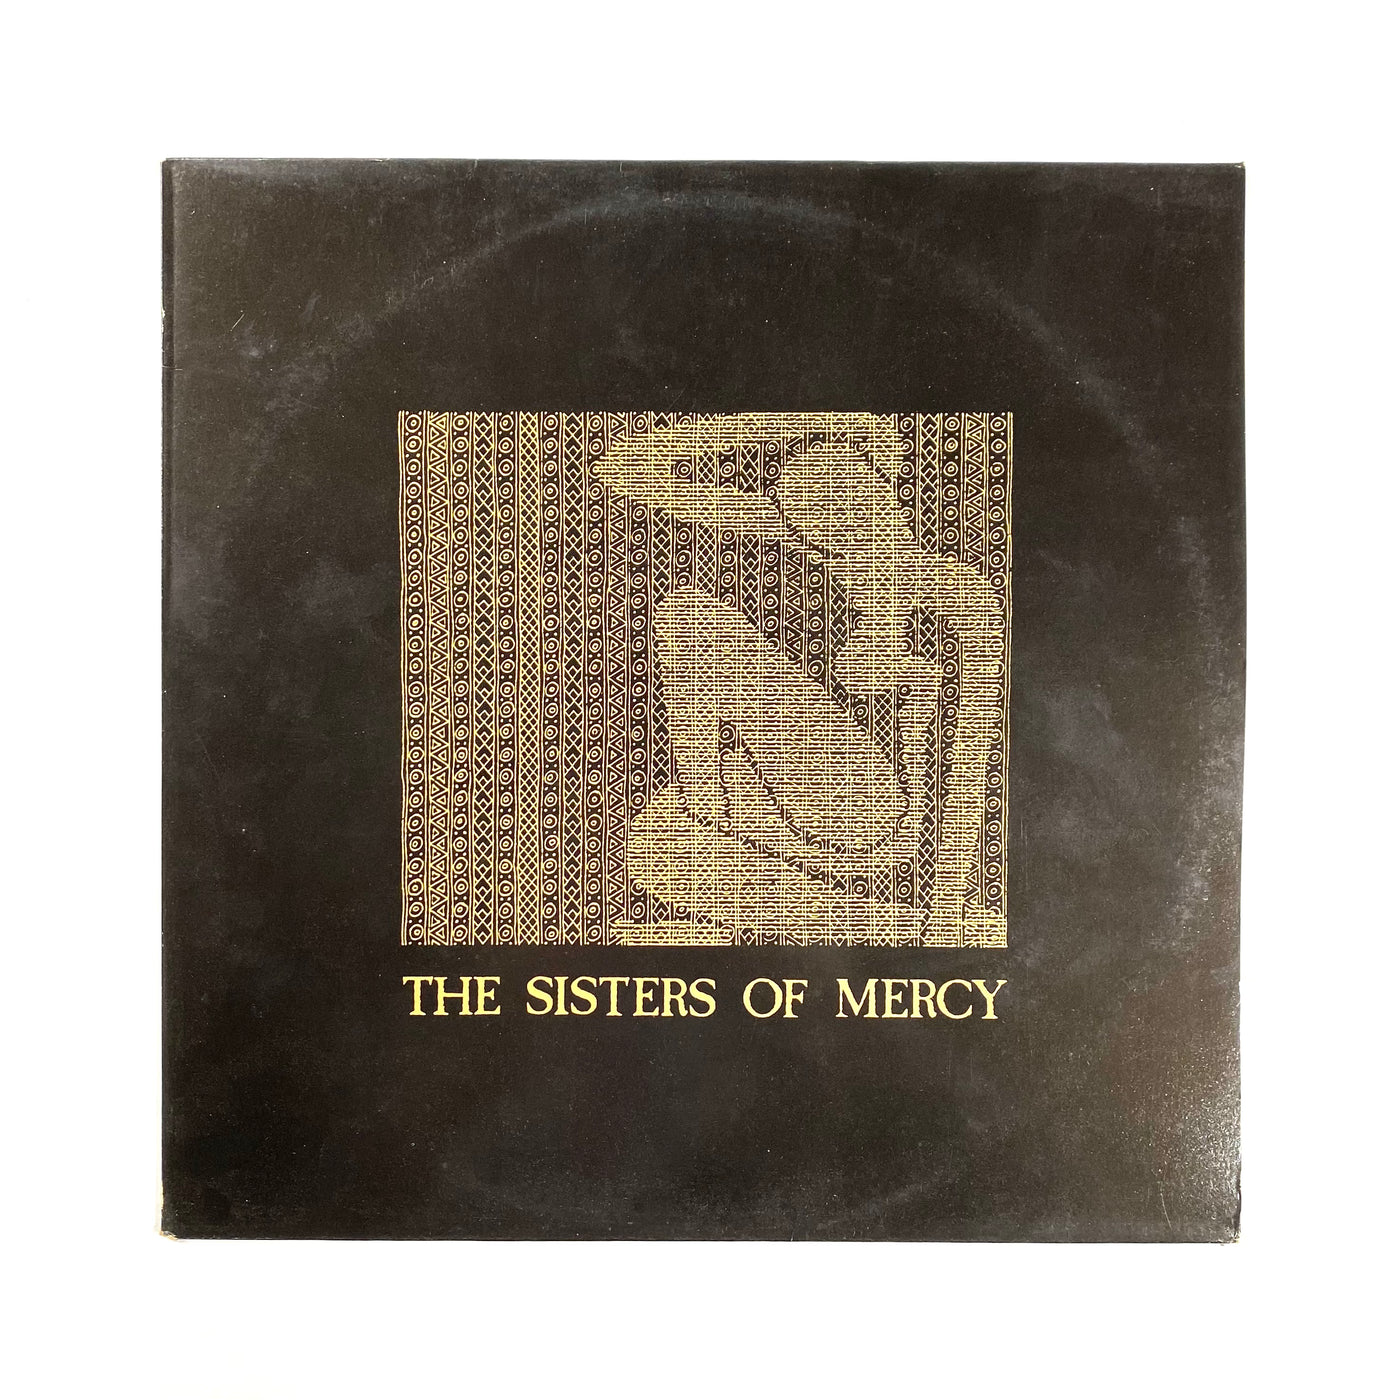 The Sisters Of Mercy - Alice